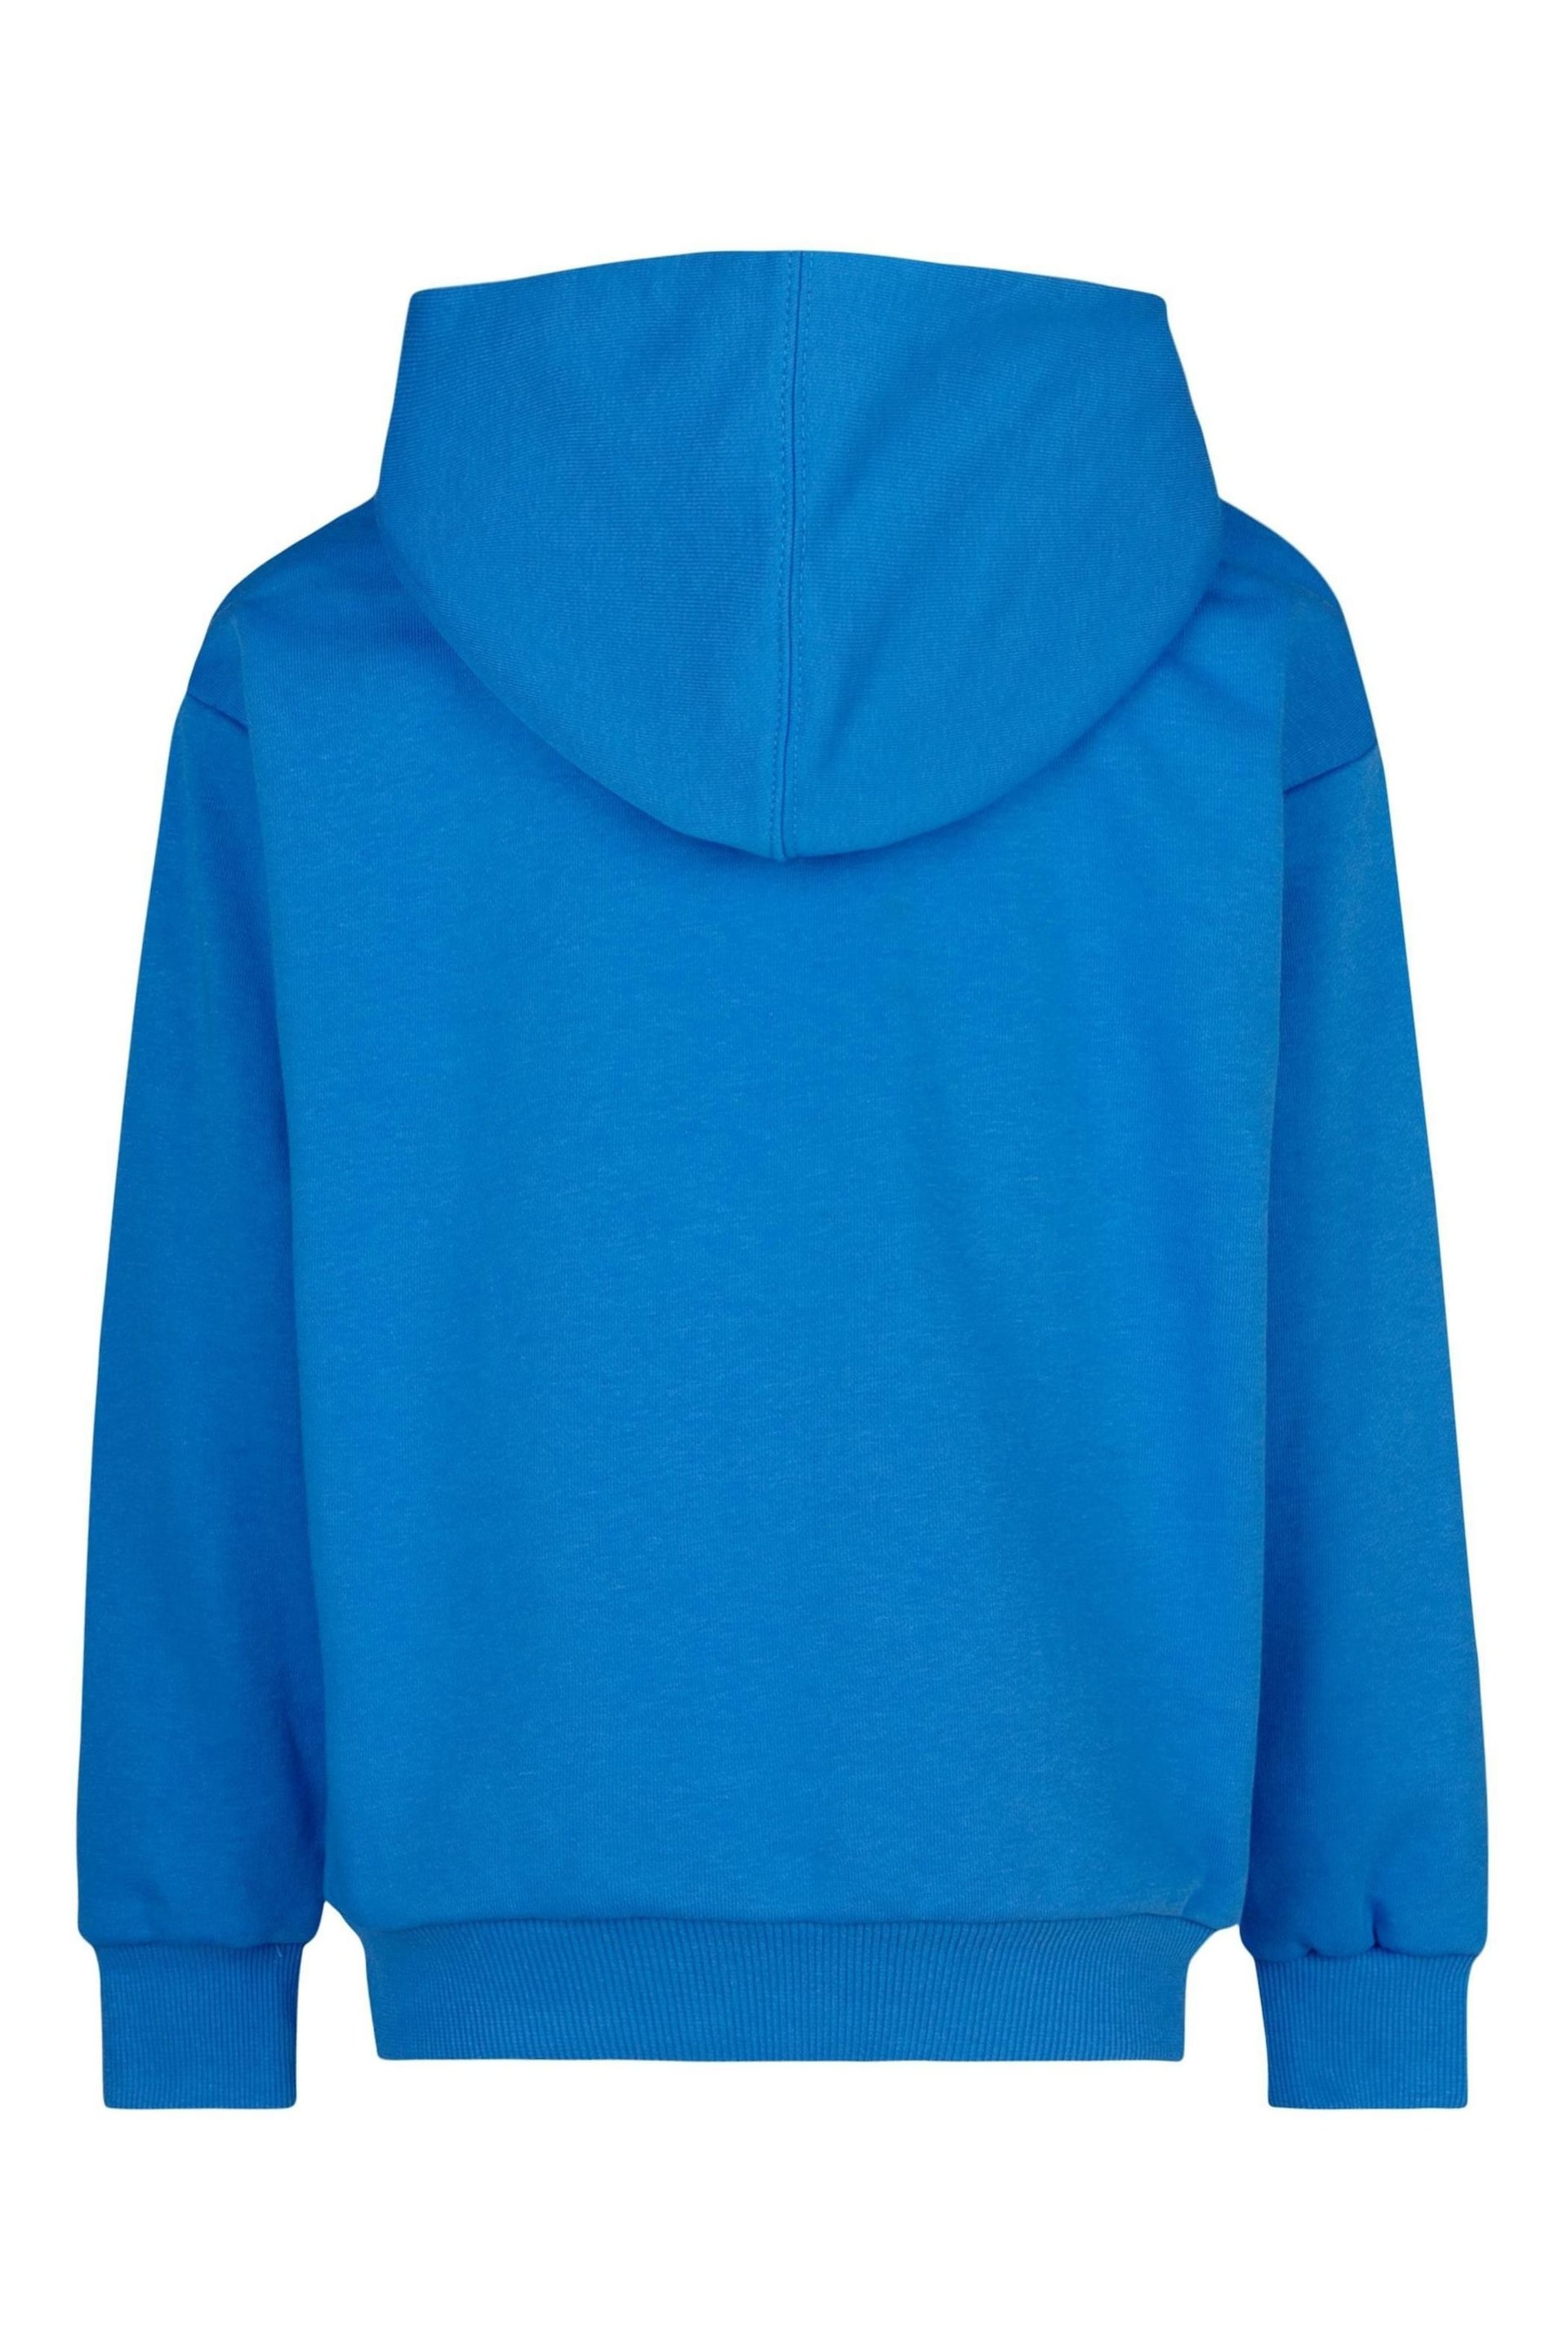 Converse Blue Sustainable Core Overhead Hoodie - Image 2 of 4